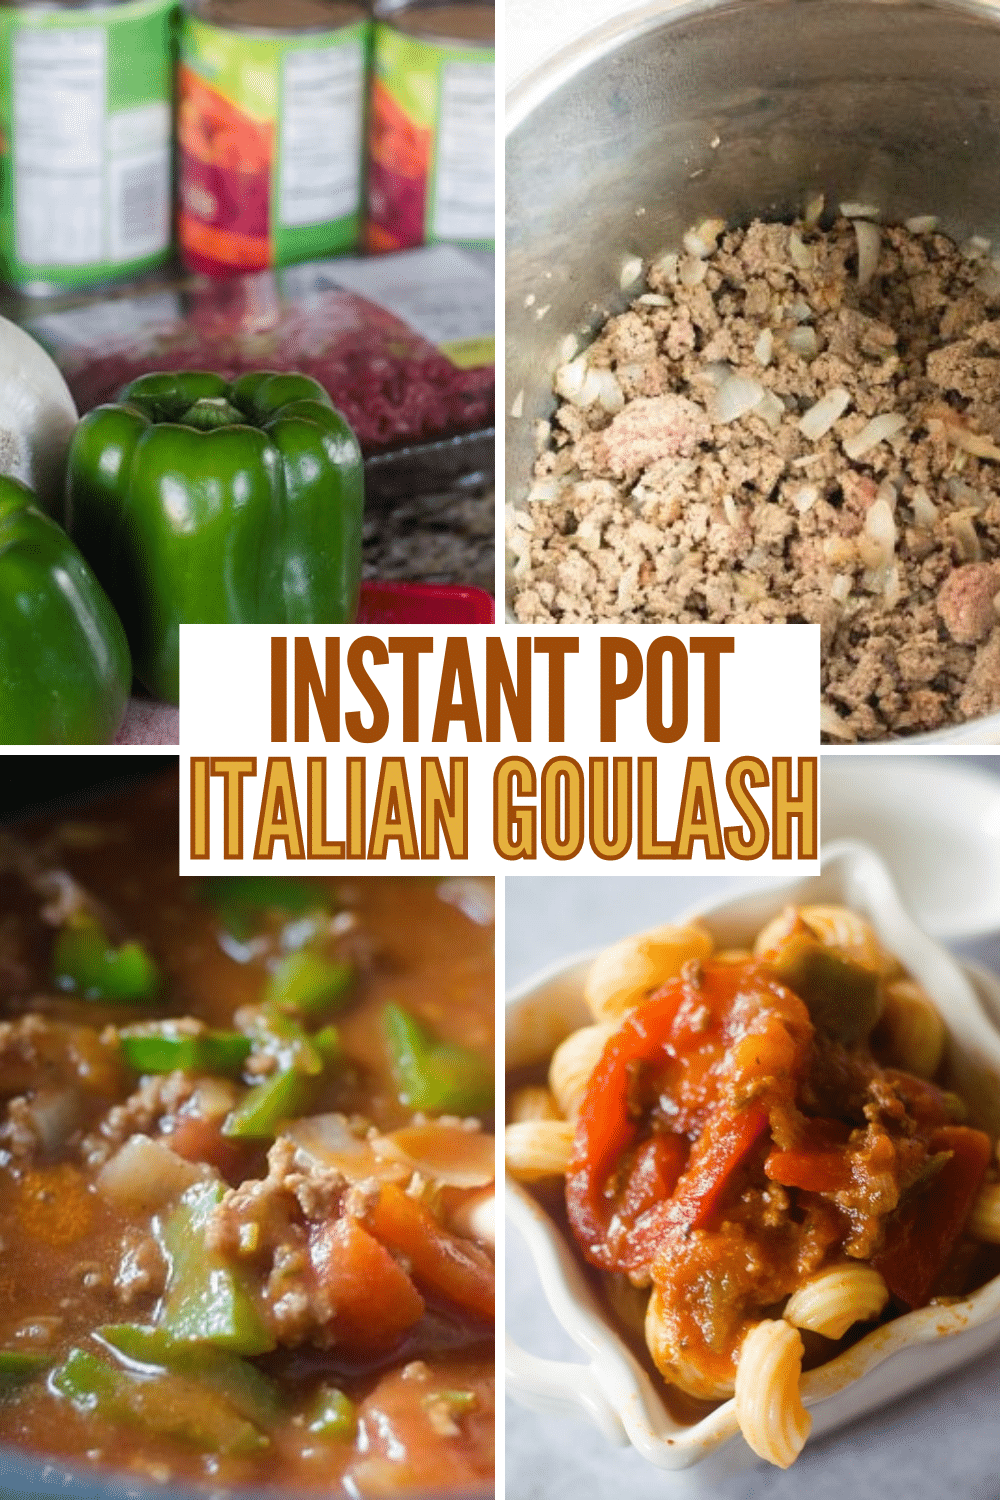 This Instant Pot Italian Goulash is so easy and everyone in the family loves it! #instantpotrecipes #easydinner #goulash #pressurecooker via @wondermomwannab